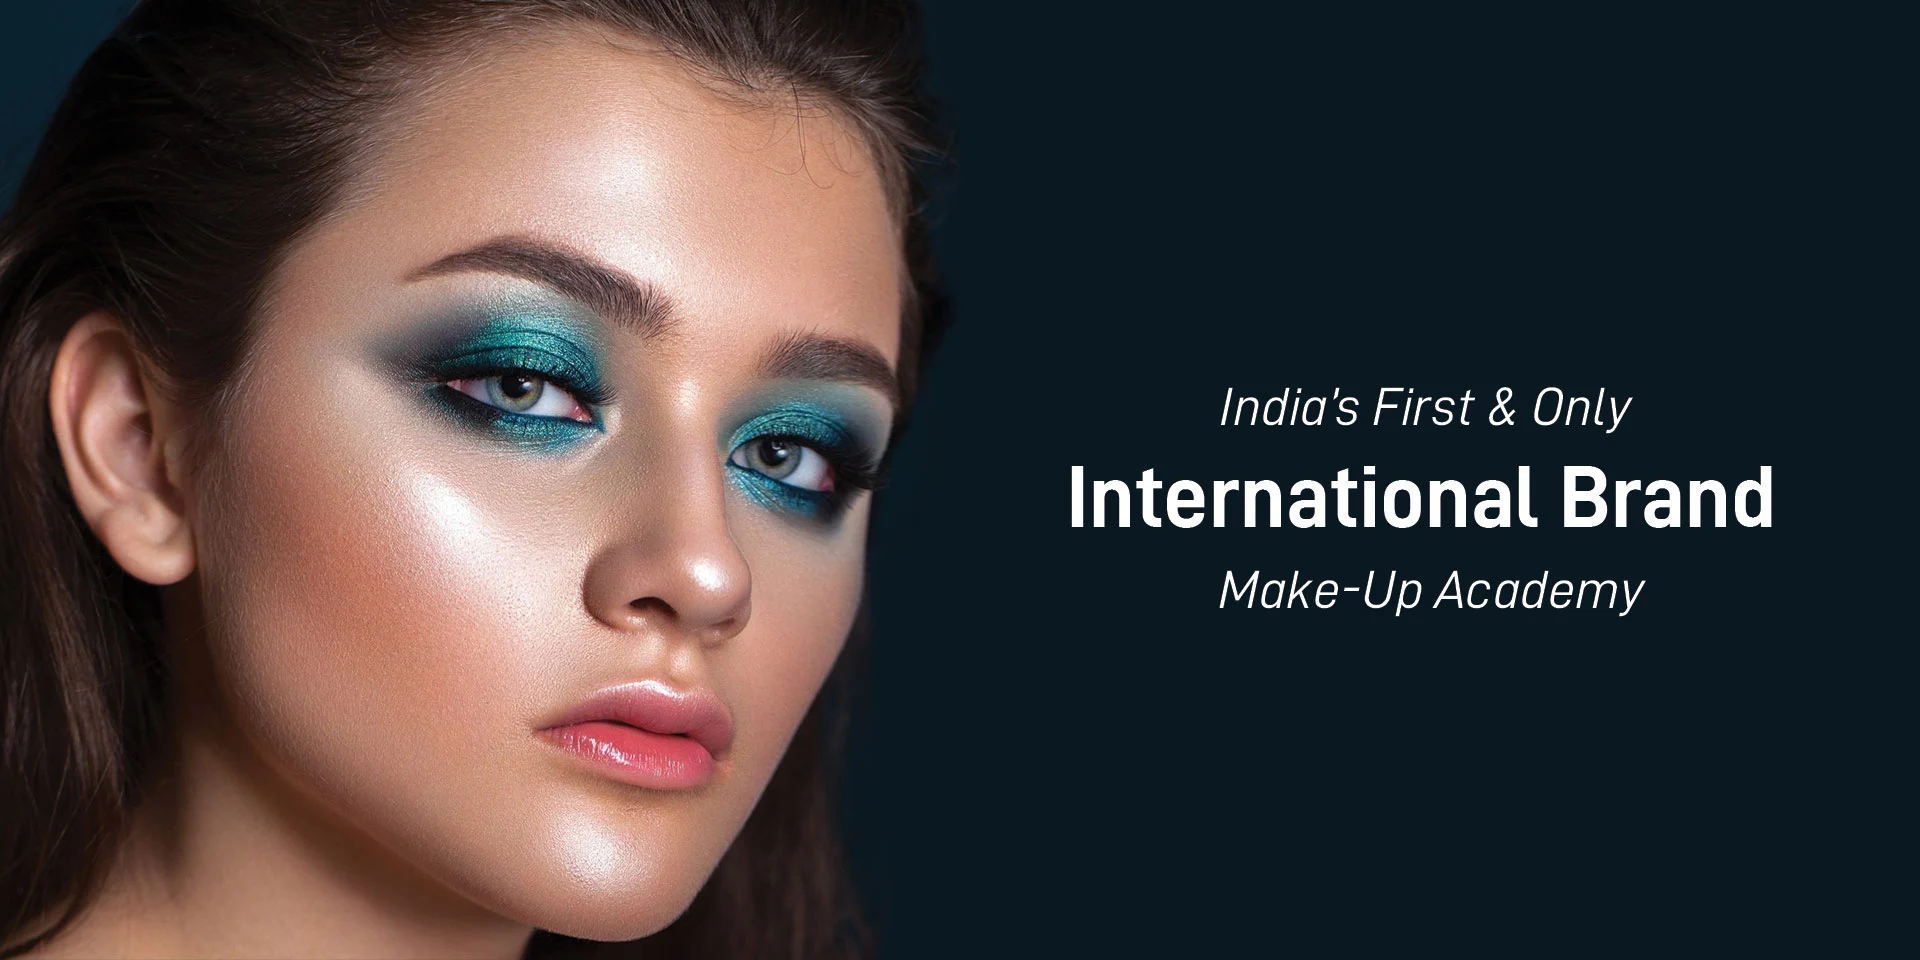 India's First and only International brand Make-up Academy